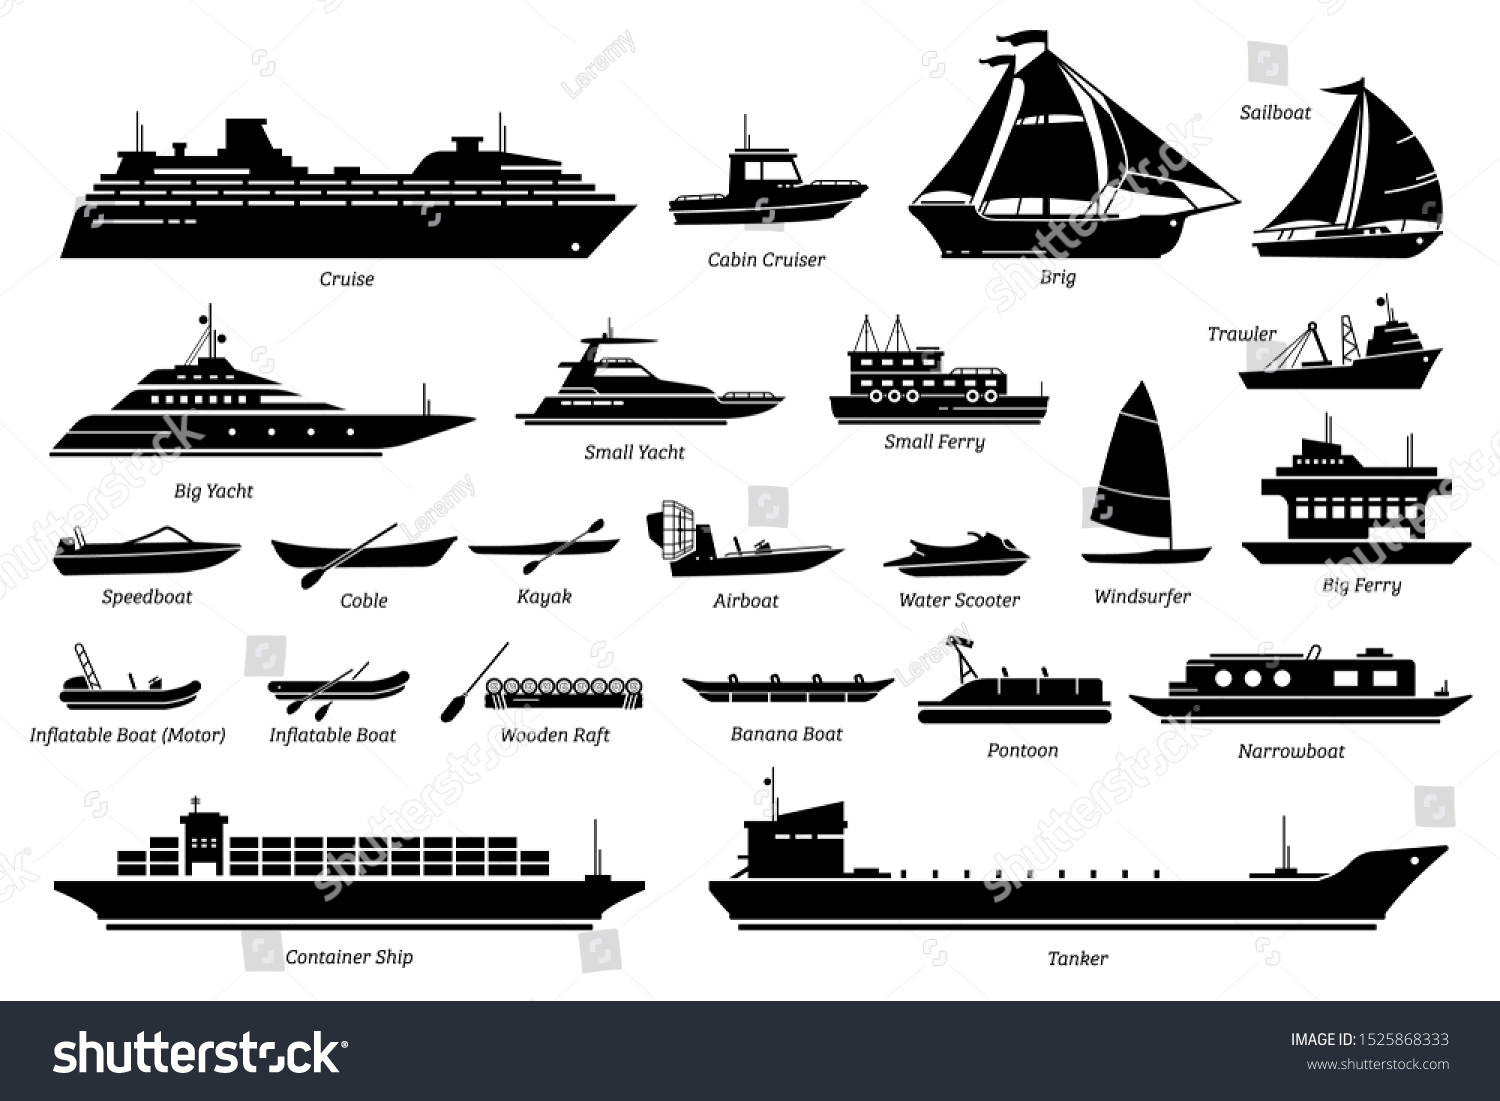 SVG of List of water transportation, ships, and boats icon set. Artwork of cruise, brig, sailboat, yacht ferry, trawler, inflatable, speedboat, water scooter, windsurfer, pontoon, container ship, and tanker. svg